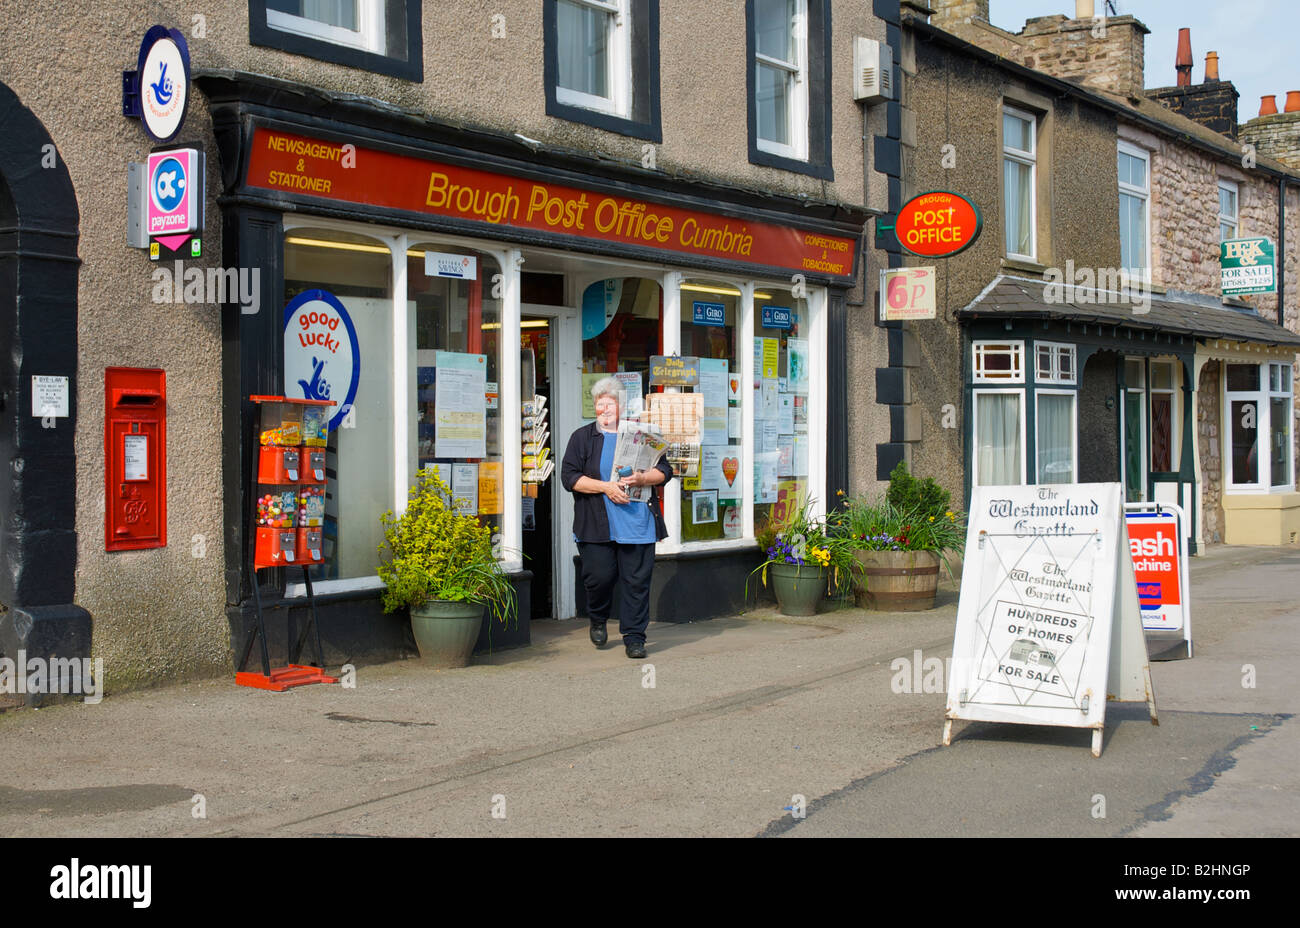 Post Office in market town of Brough, Cumbria, England UK, which shut in 2008 Stock Photo